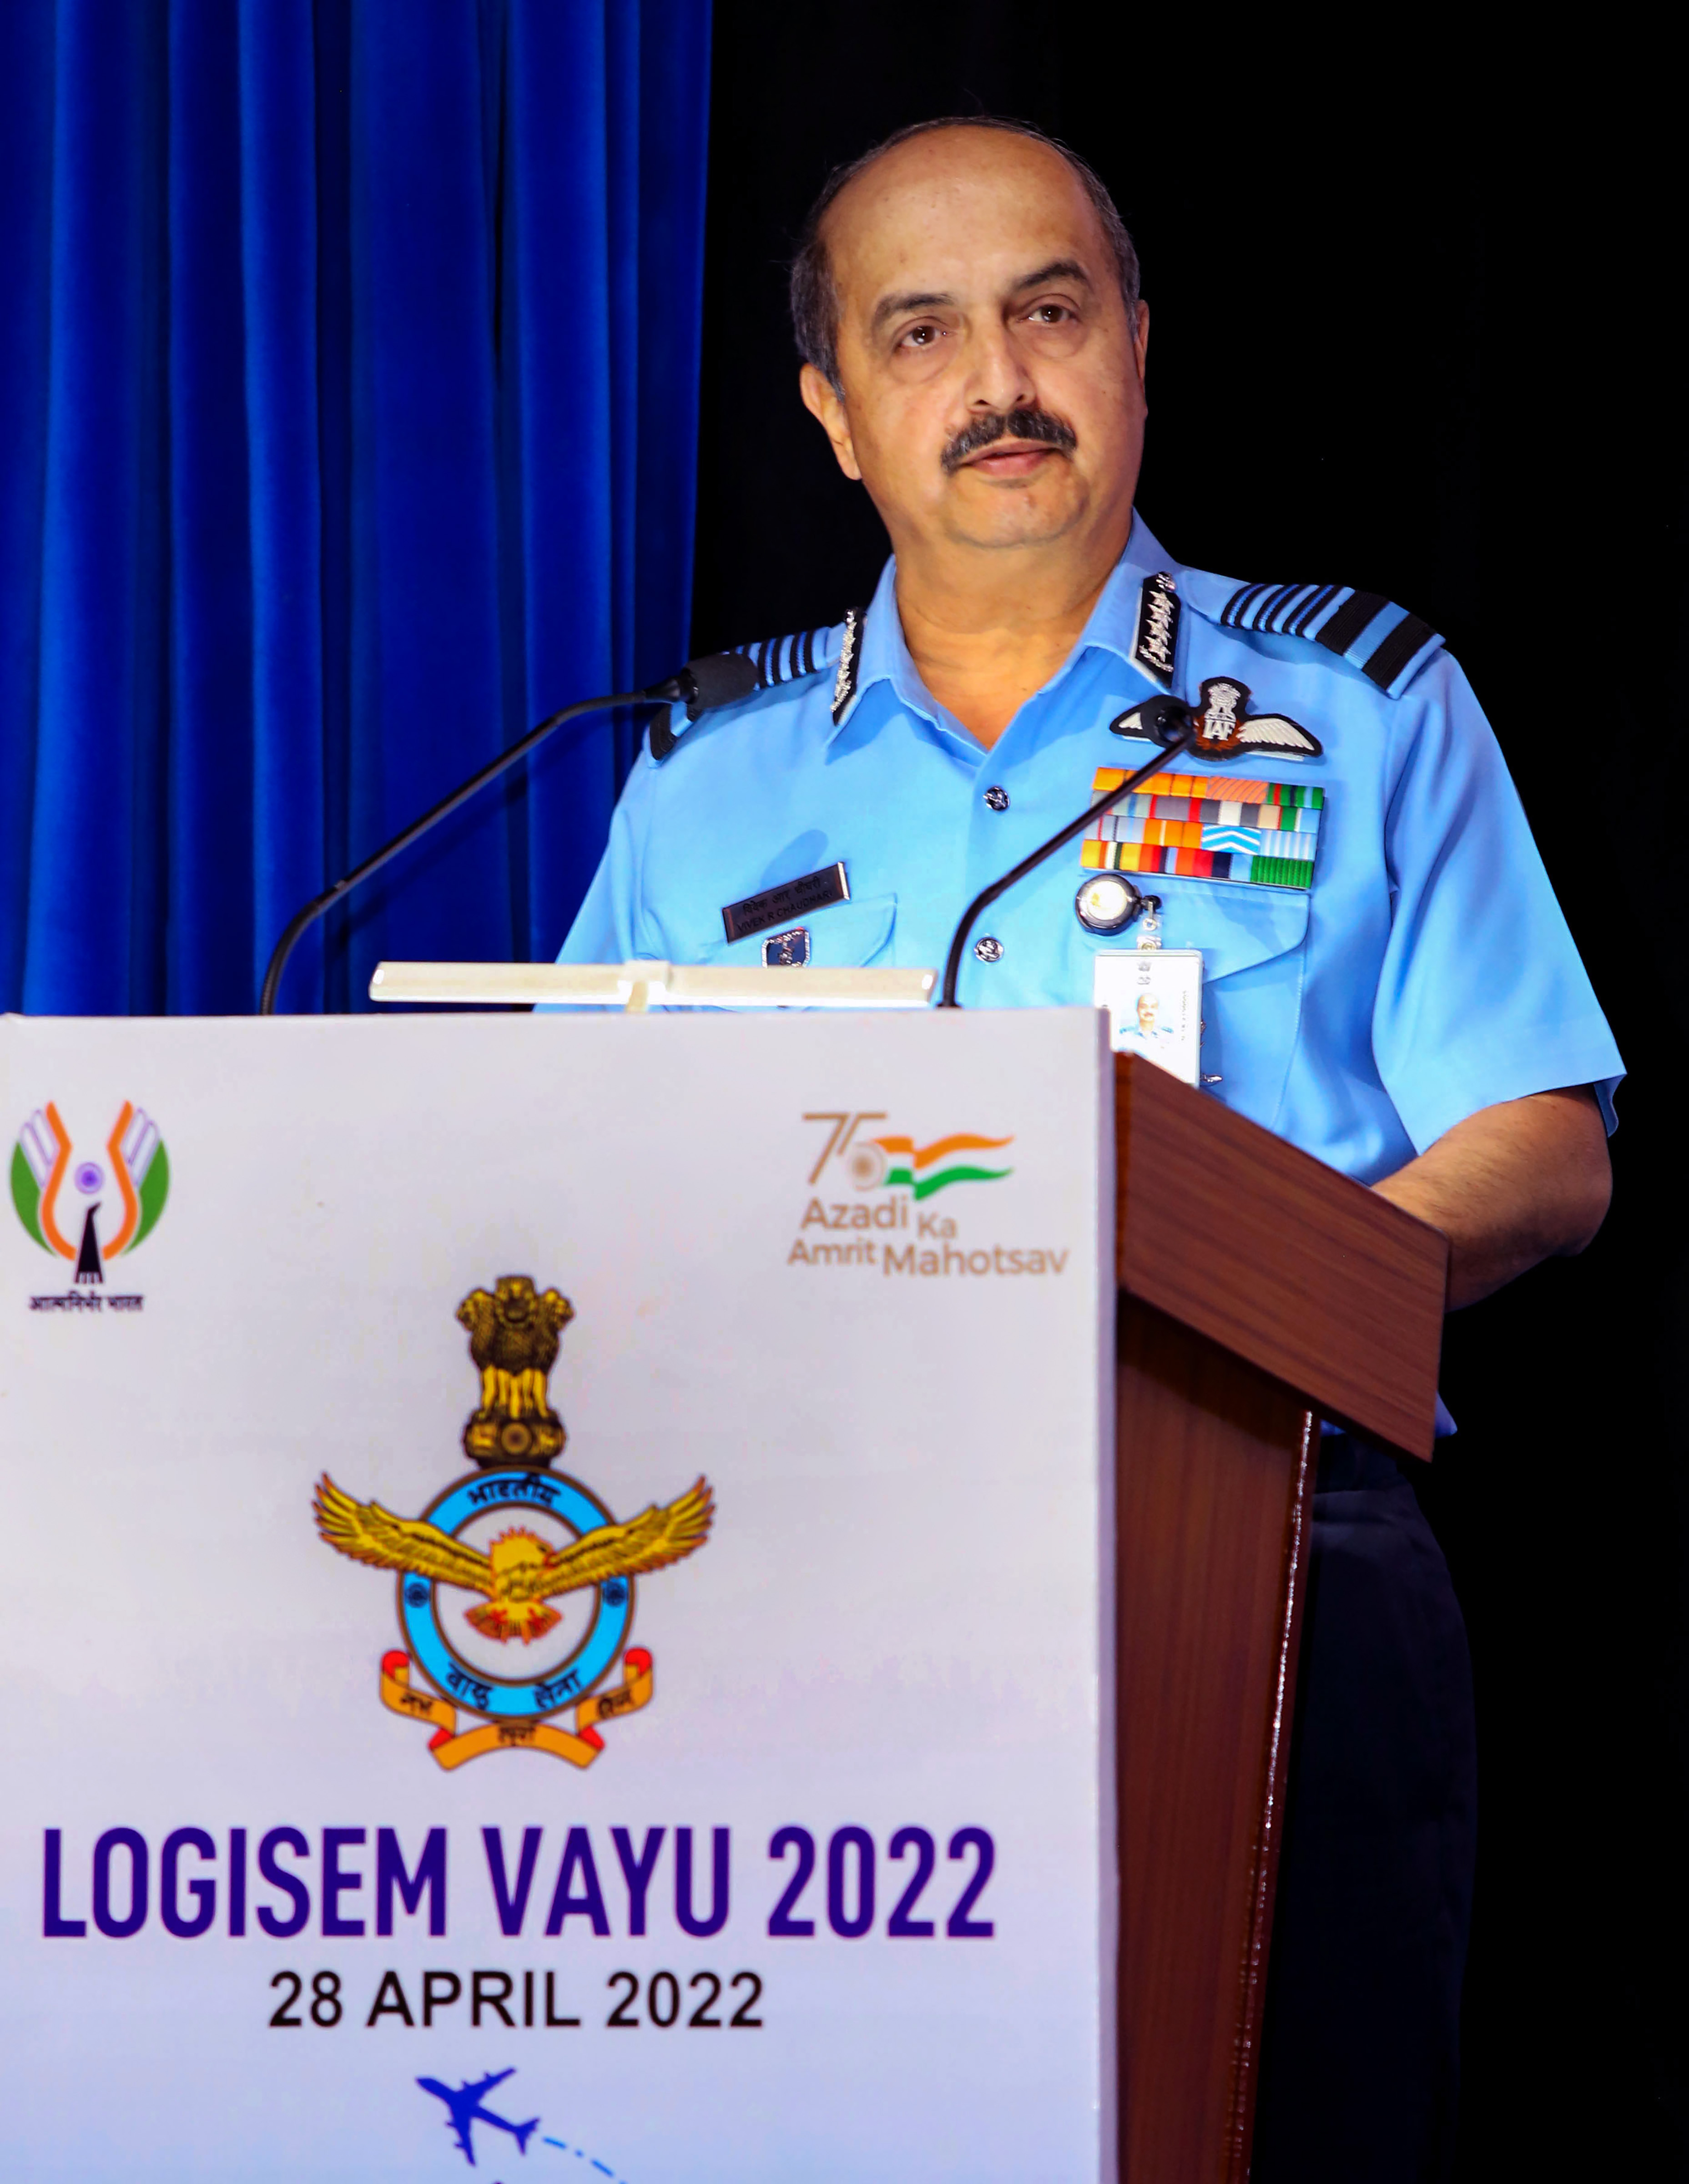 Need to prepare for short, swift wars, says IAF Chief